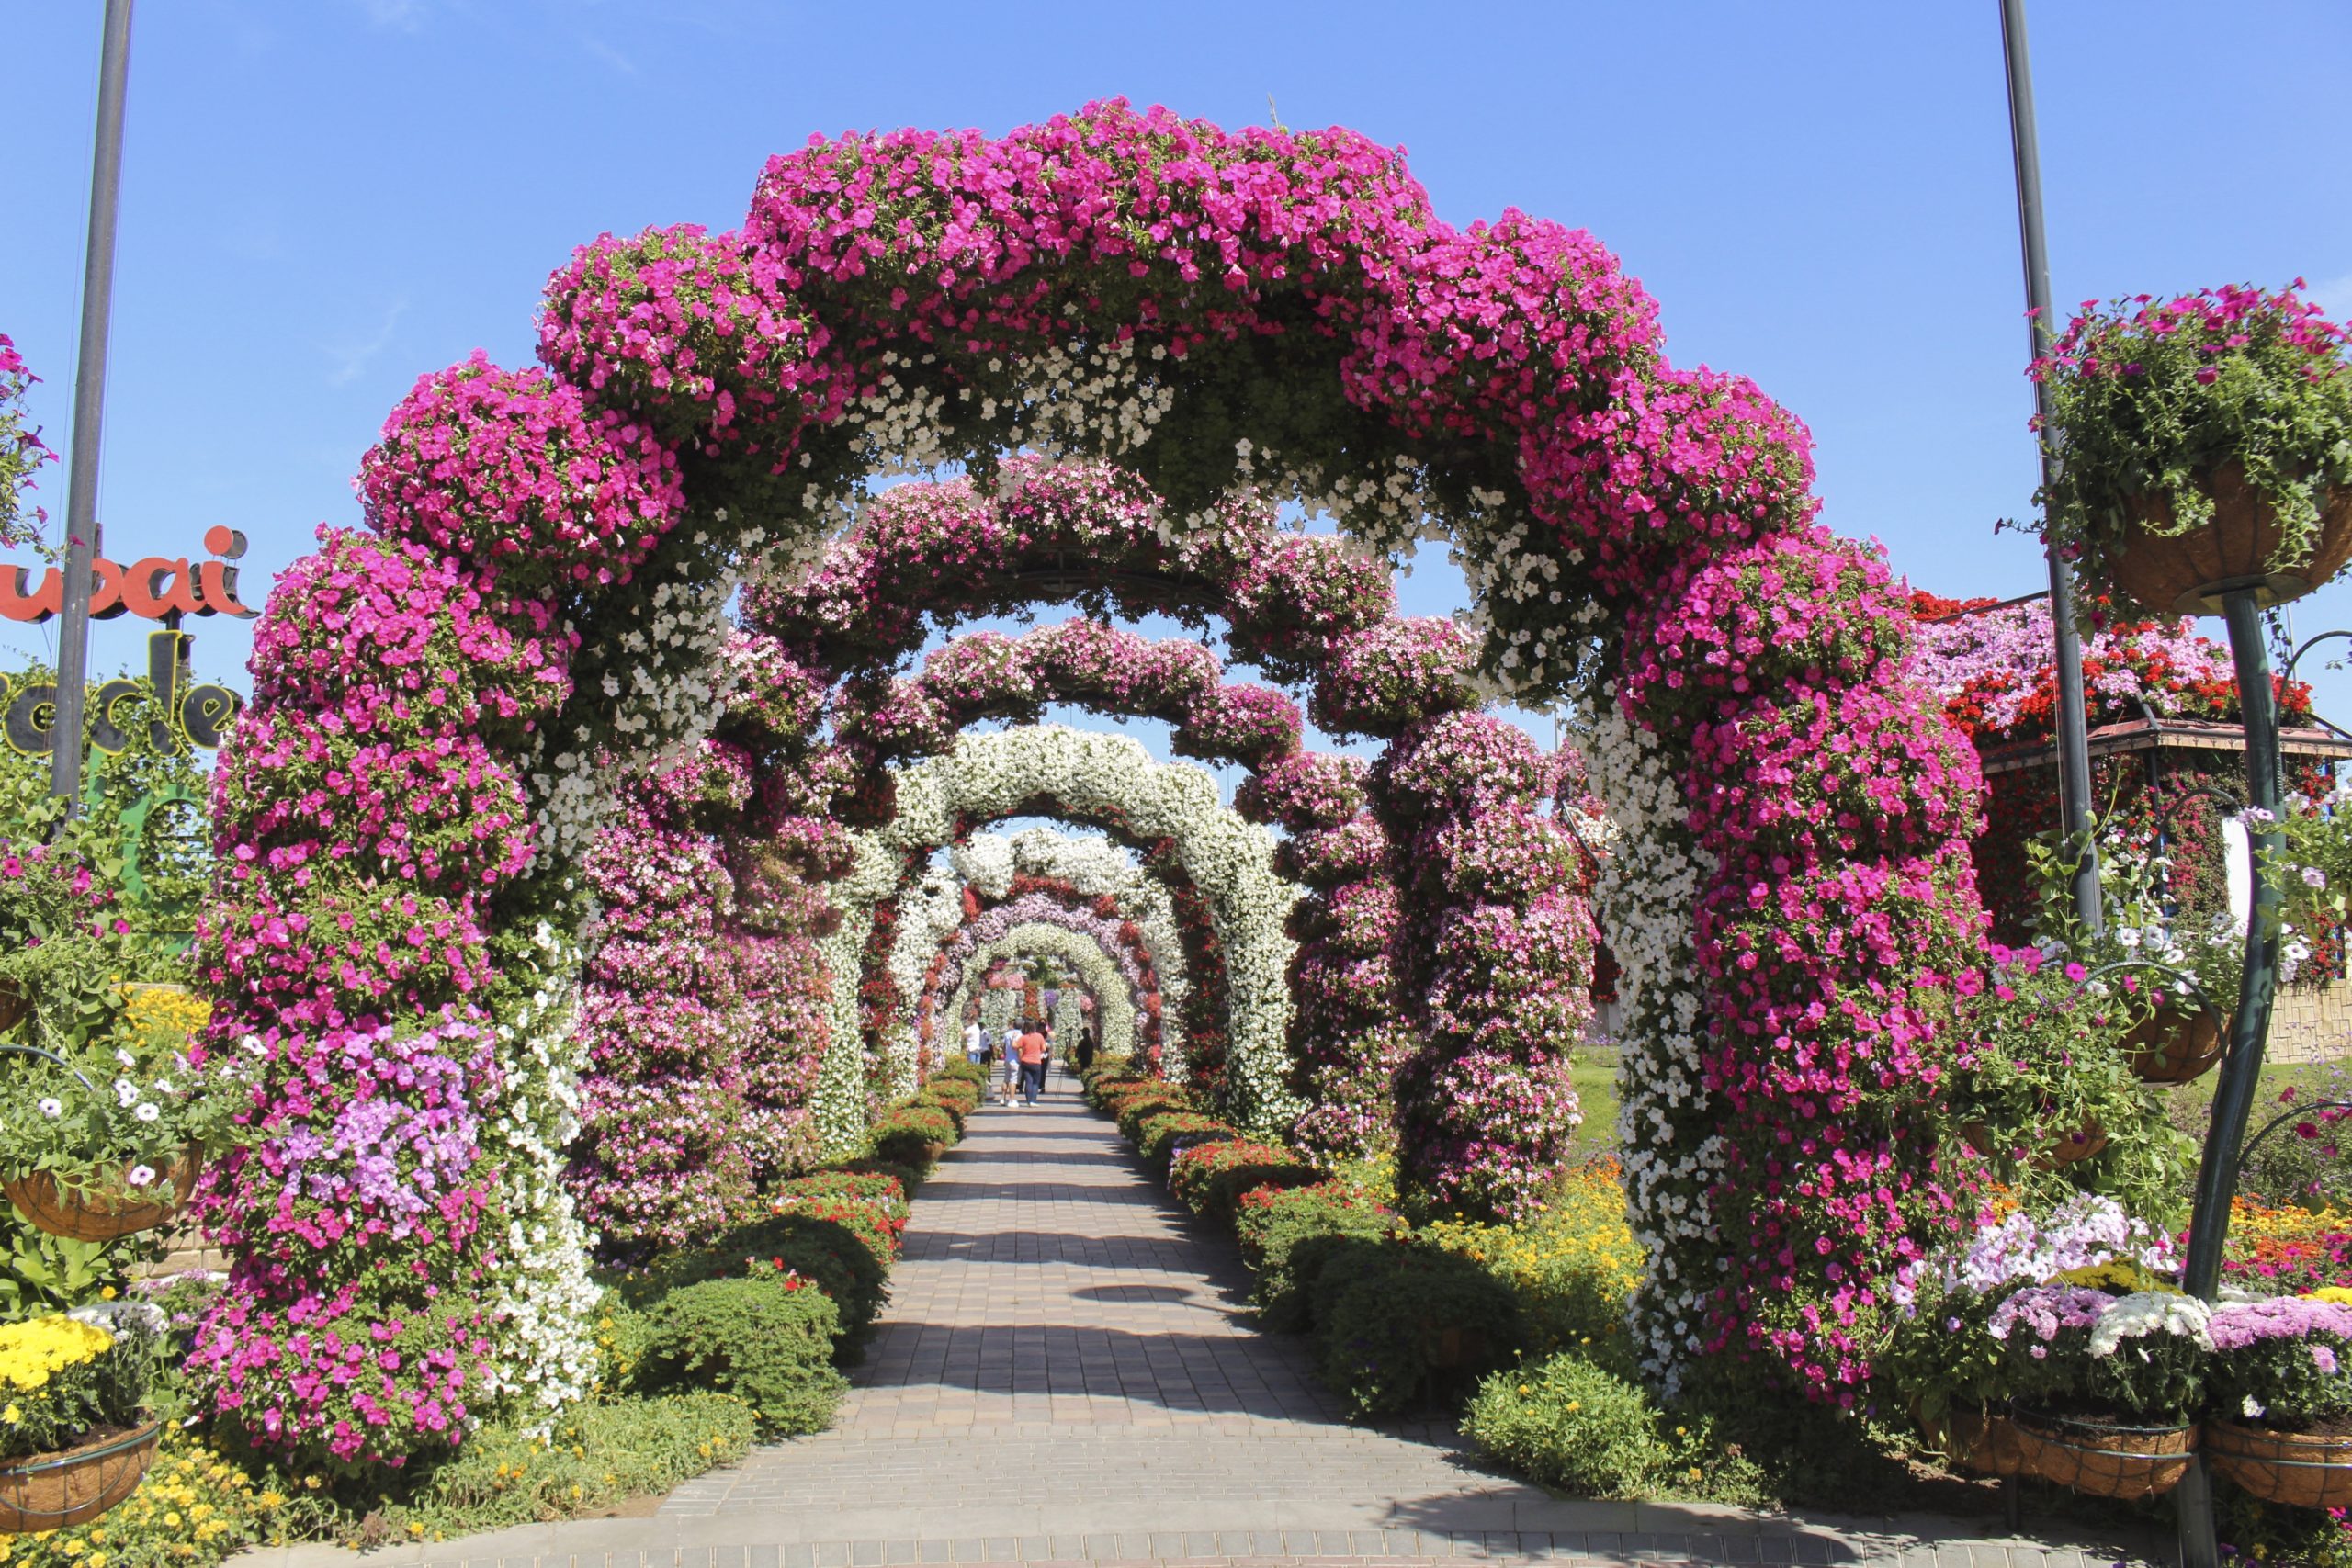 The Miracle Garden (Dubai, United Arab Emirates) from Chris Woods's 